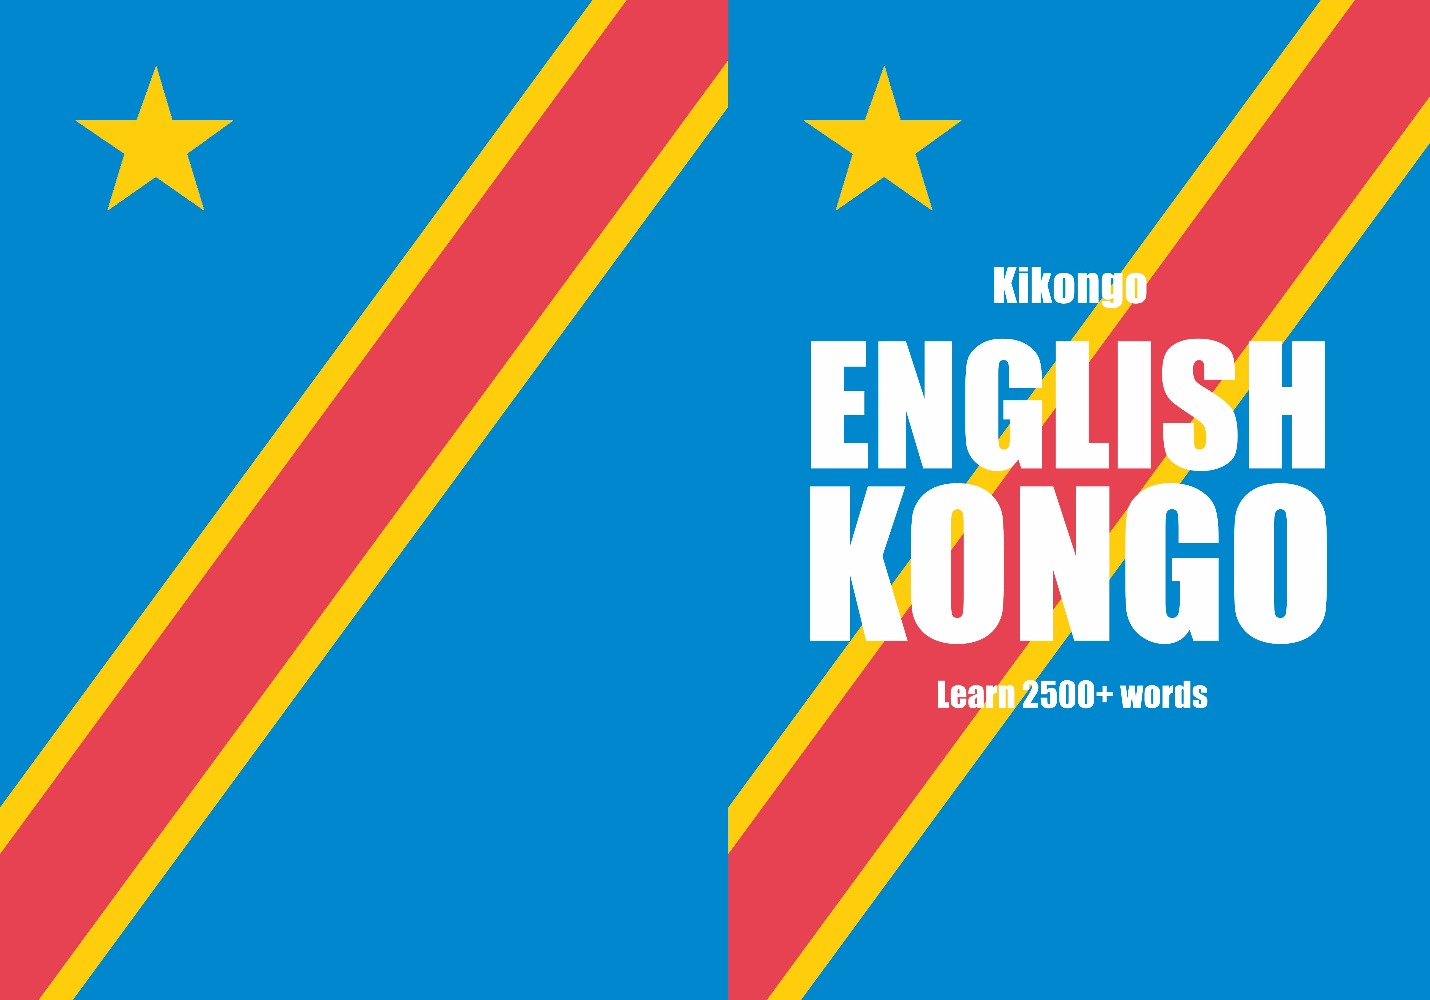 Kongo language learning notebook cover